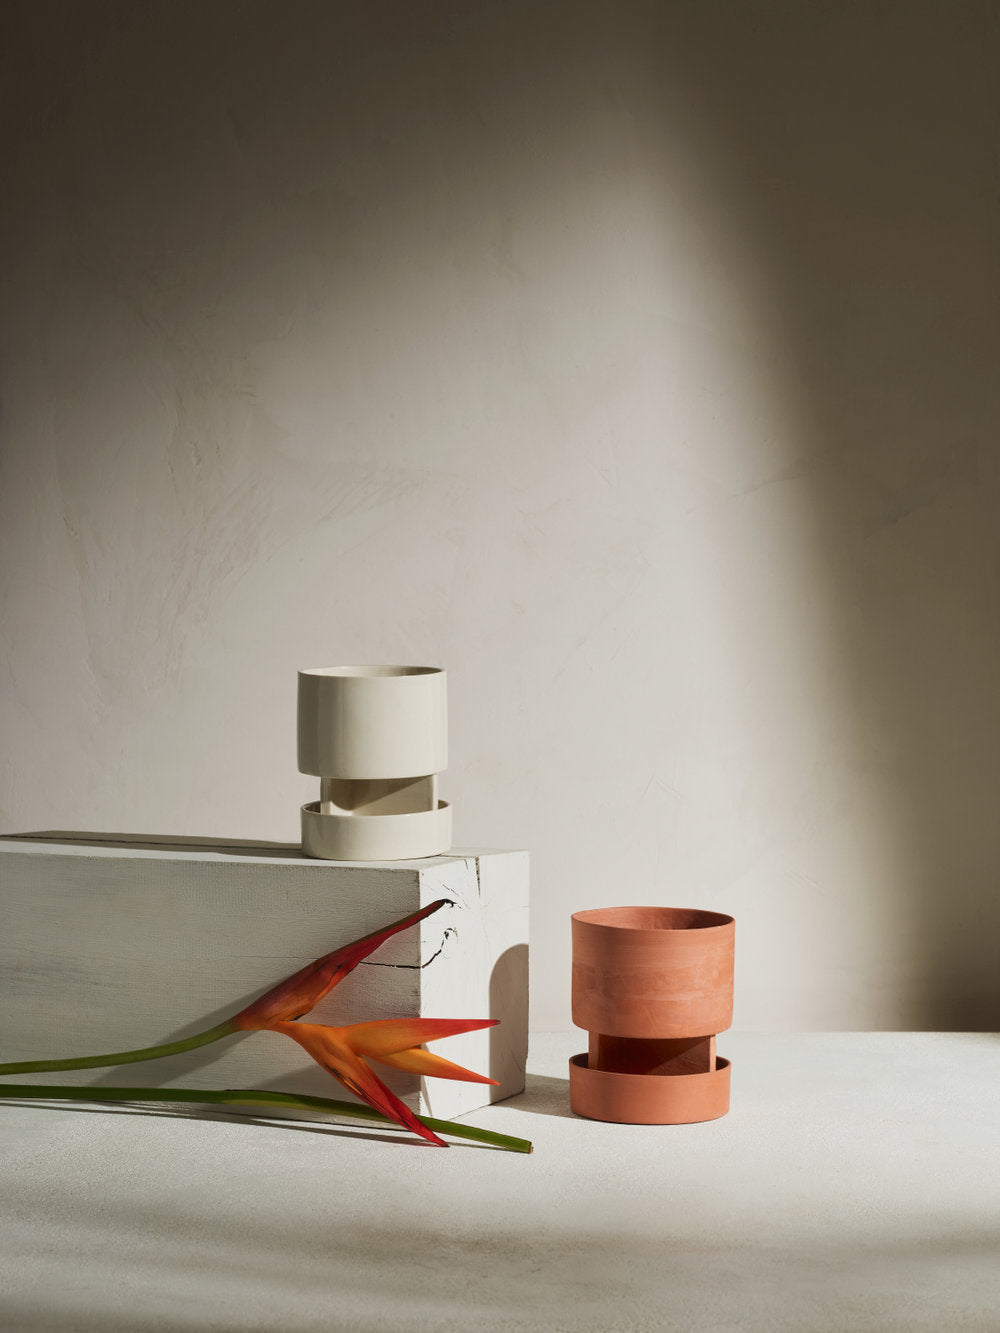 Archromo desktop planters with trays, one in Terracotta and one in white glaze